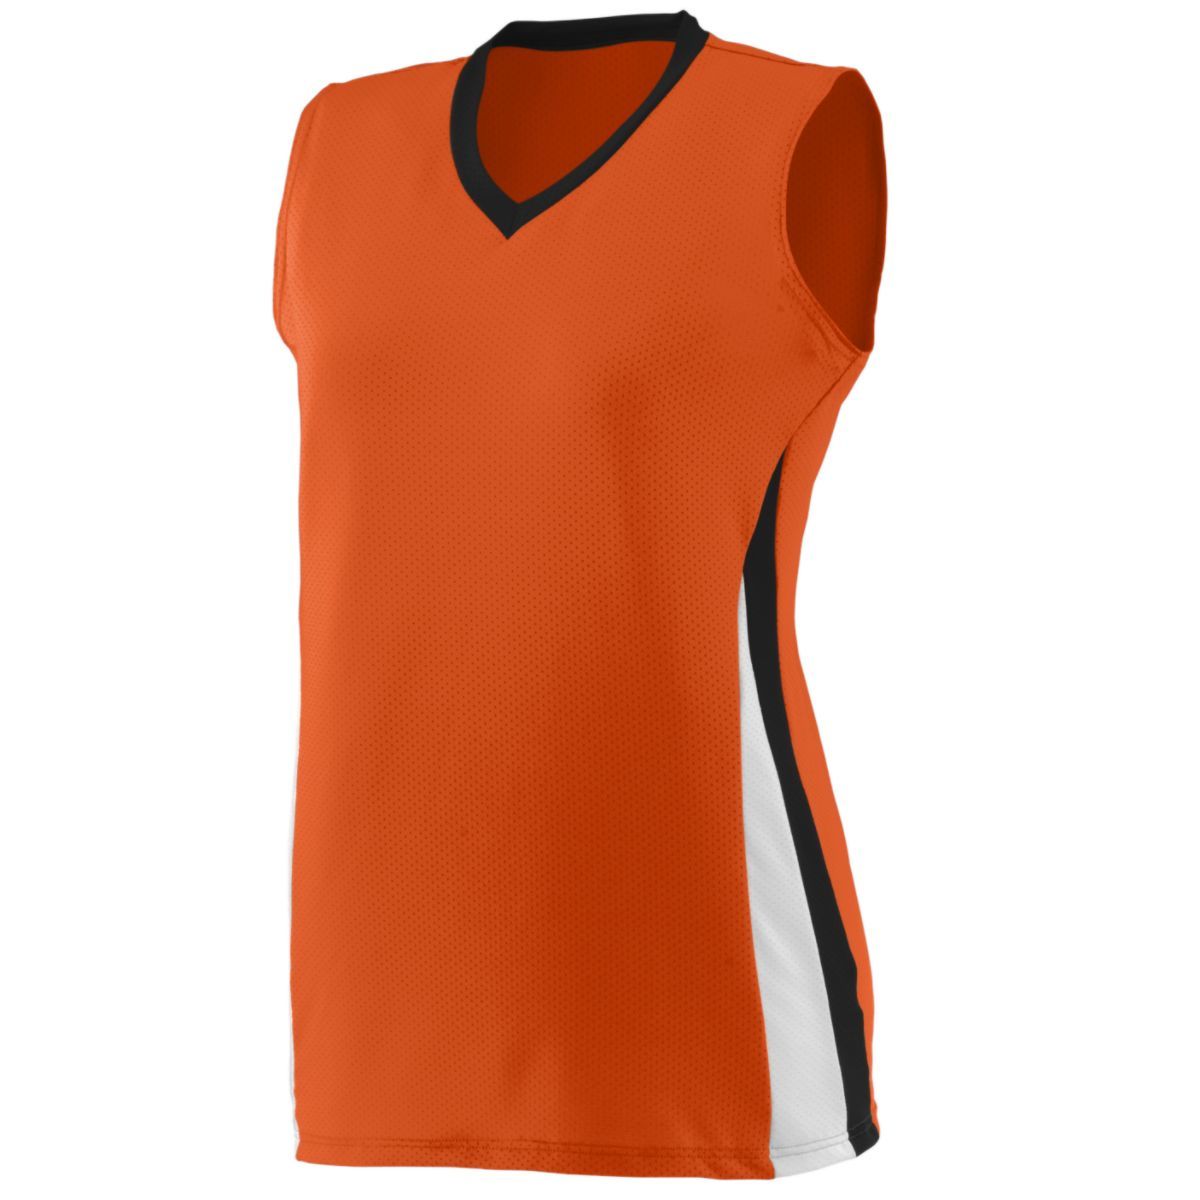 Augusta Sportswear Girls Tornado Jersey in Orange/Black/White  -Part of the Girls, Augusta-Products, Volleyball, Girls-Jersey, Shirts product lines at KanaleyCreations.com